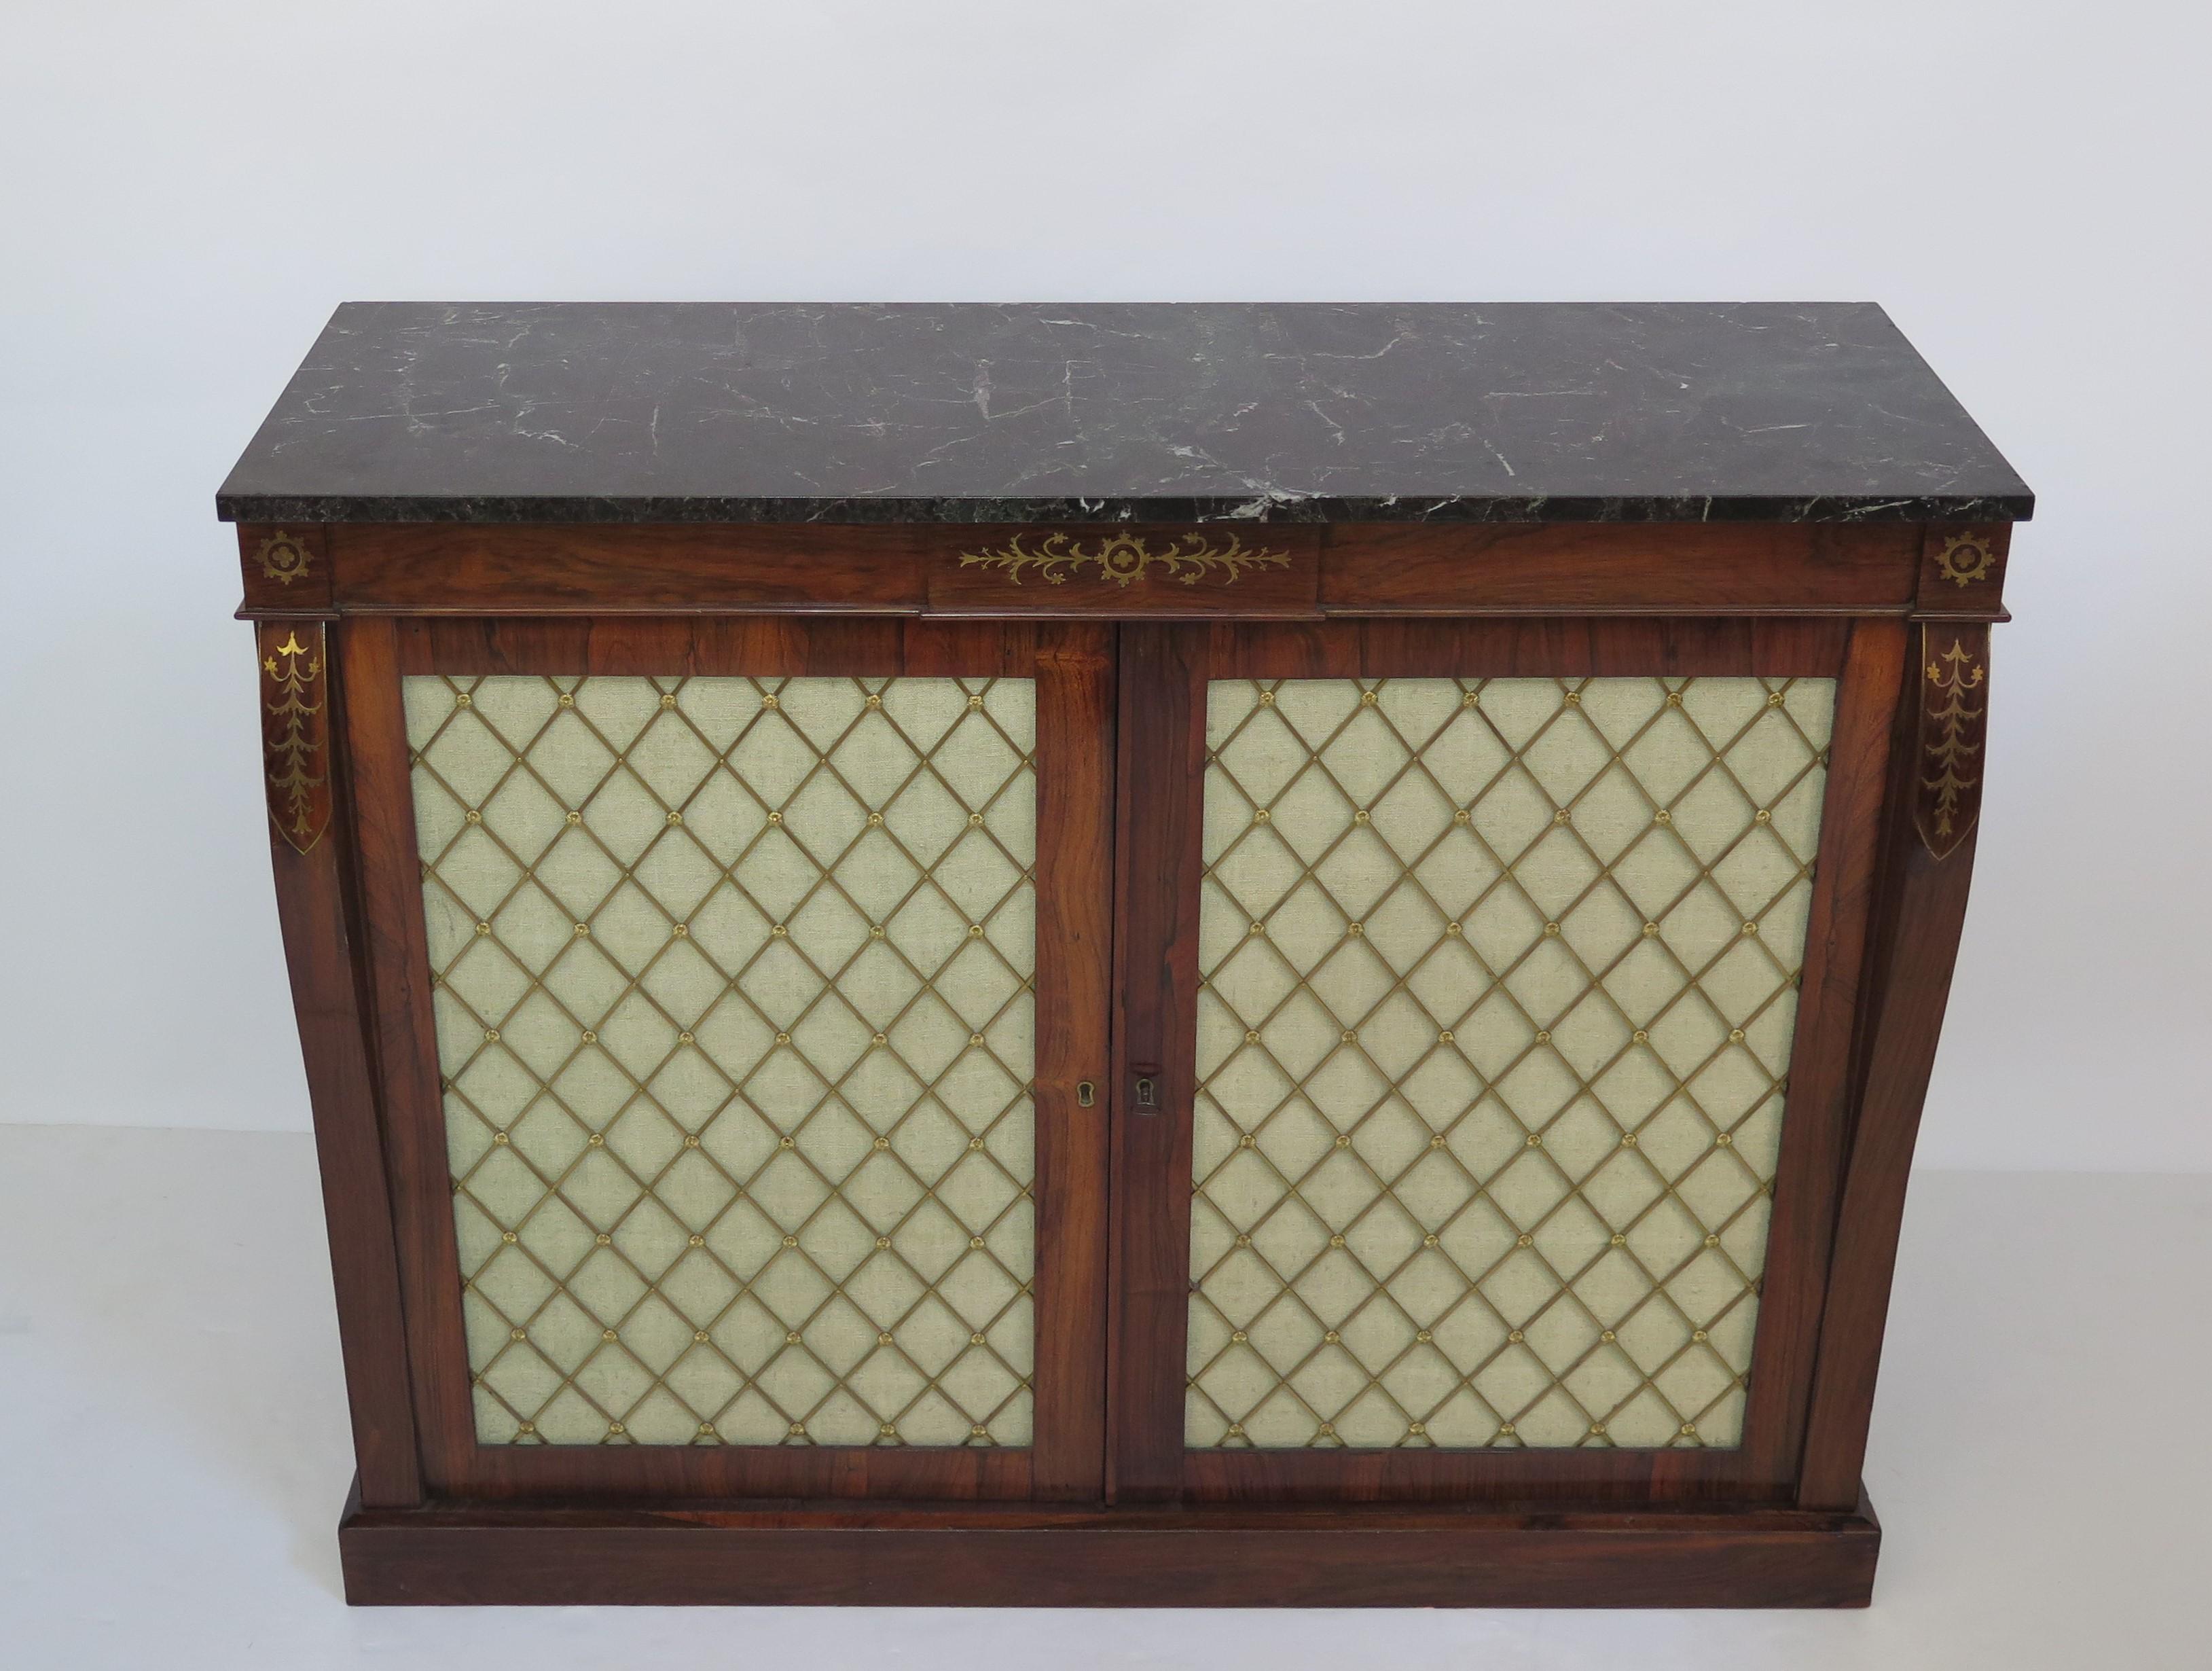 Inlay Period English Regency Brass Inlaid Cabinet Chiffonier of Rosewood